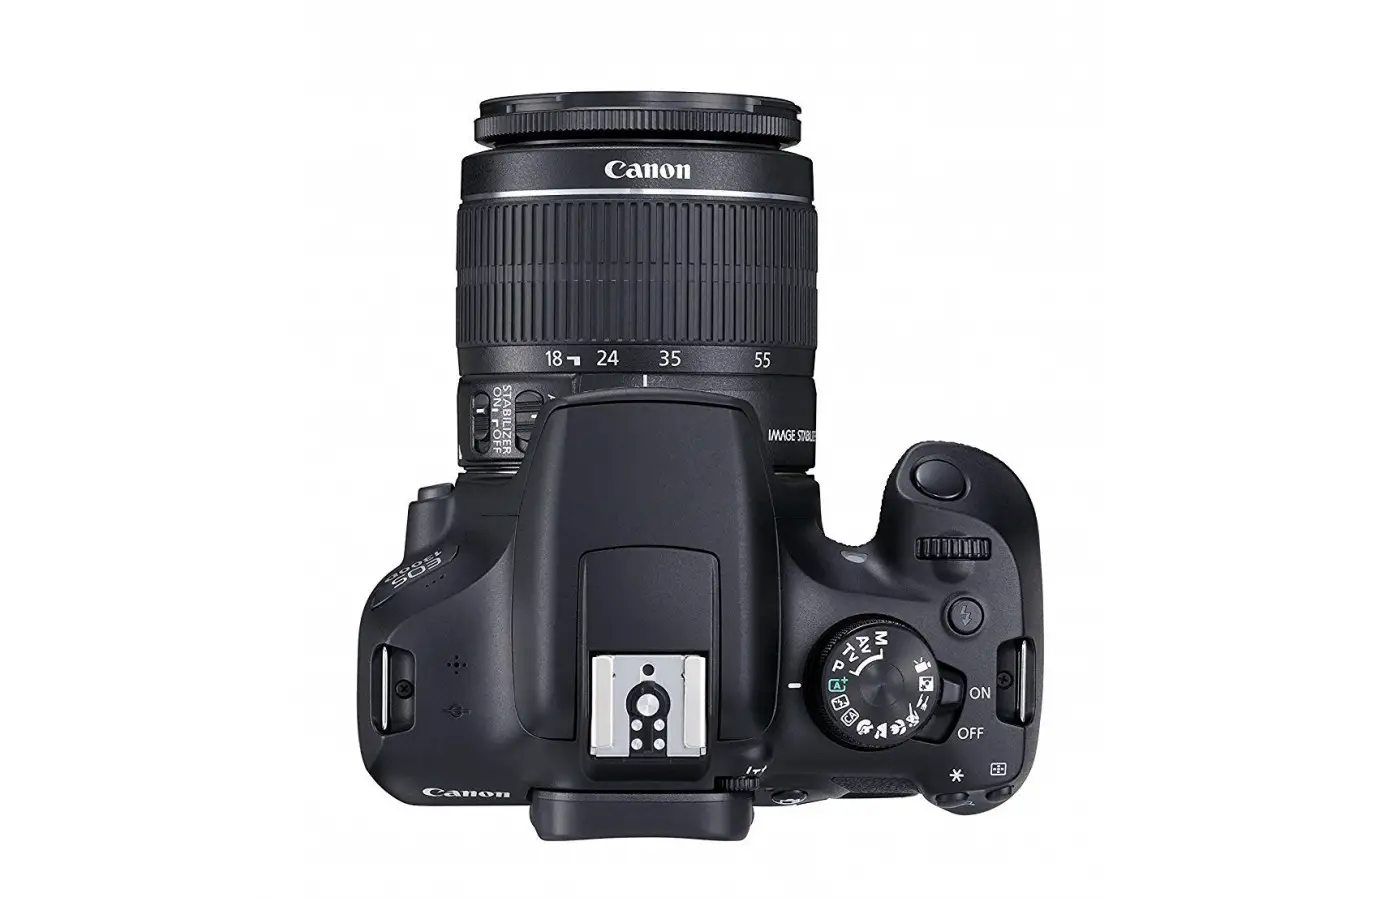 The Canon EOS 1300D offers continuous shooting up to 3 frames per second for even better image quality.